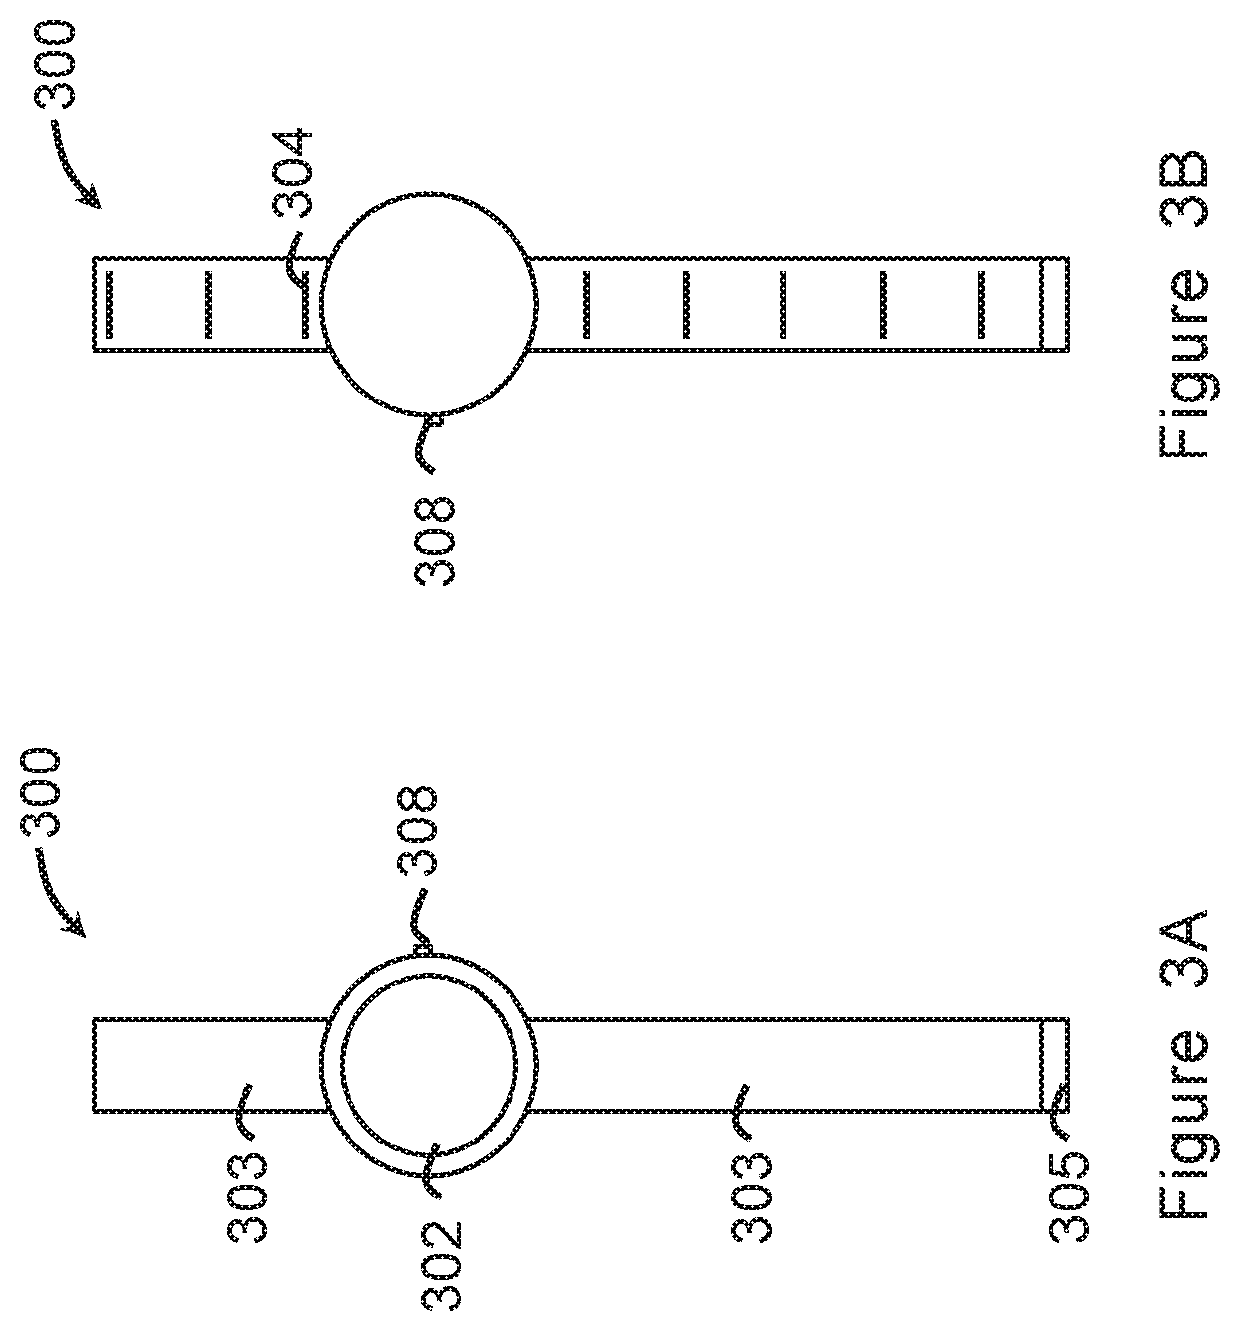 Wearable gesture recognition device and associated operation method and system